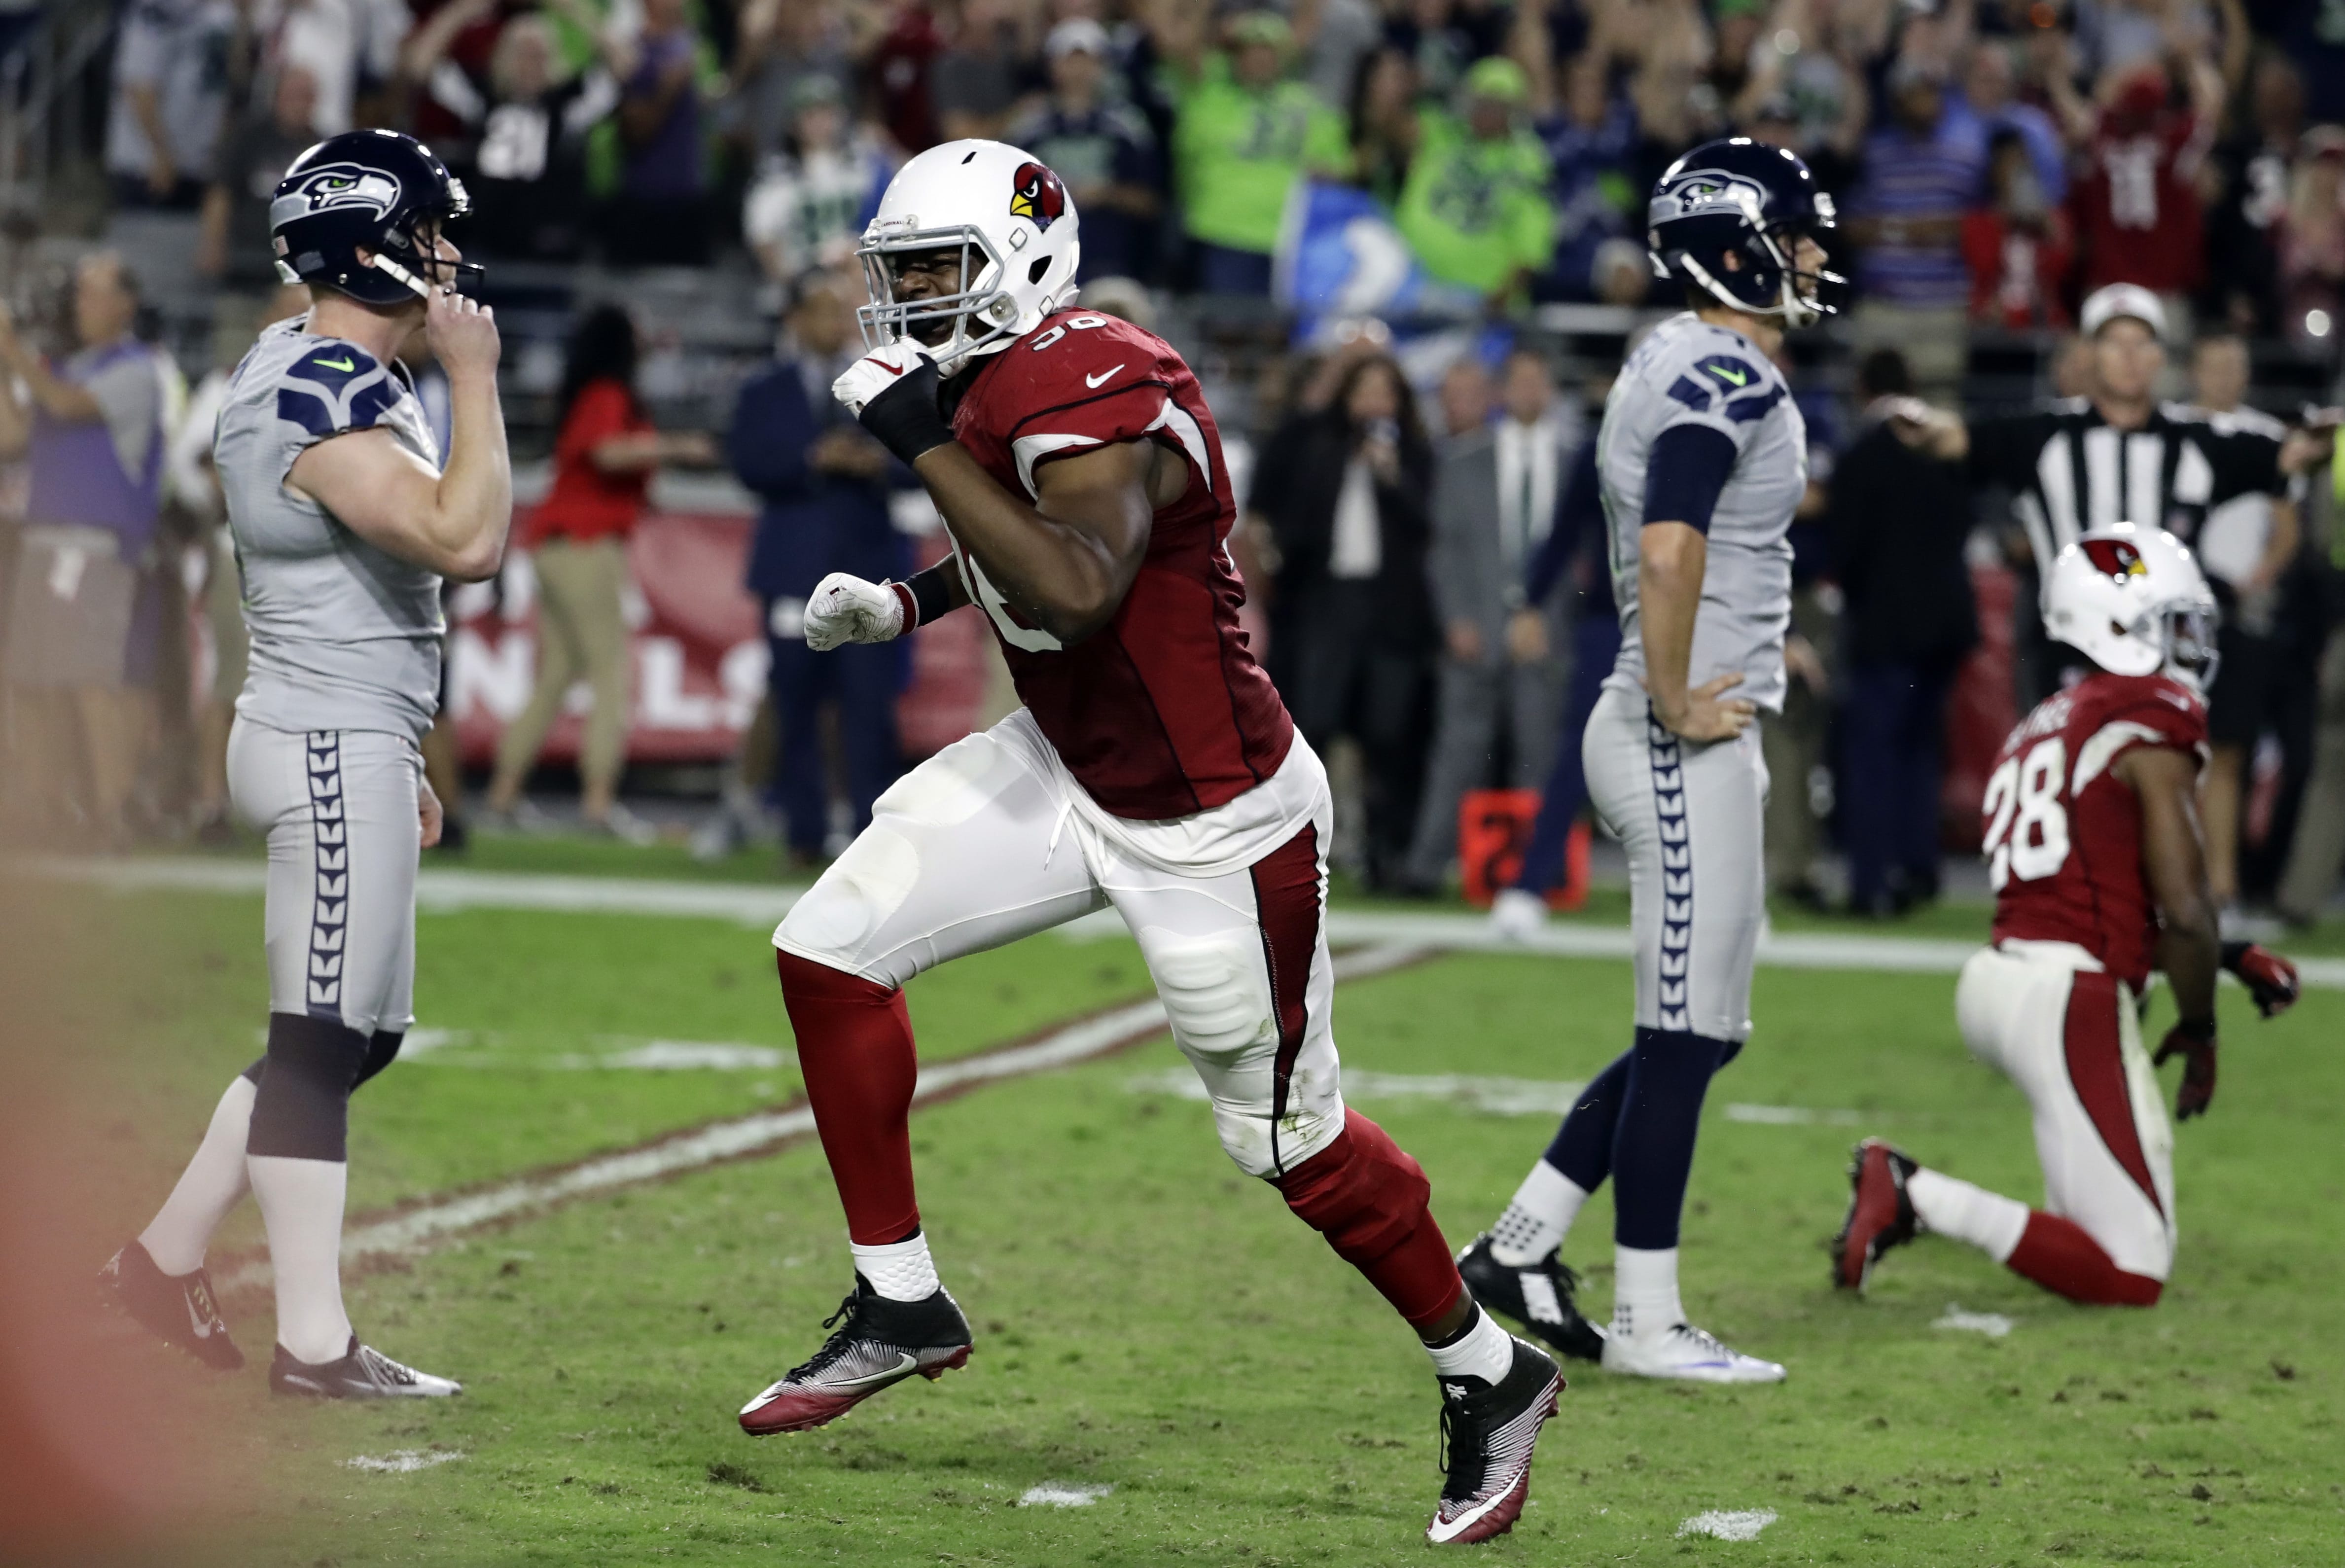 Arizona Cardinals linebacker Kareem Martin, center, reacts to Seattle Seahawks kicker Stephen Hauschka's, left, missed game-winning field goal attempt during overtime an NFL football game against the Arizona Cardinals, Sunday, Oct. 23, 2016, in Glendale, Ariz. The game ended in overtime in a 6-6 tie.